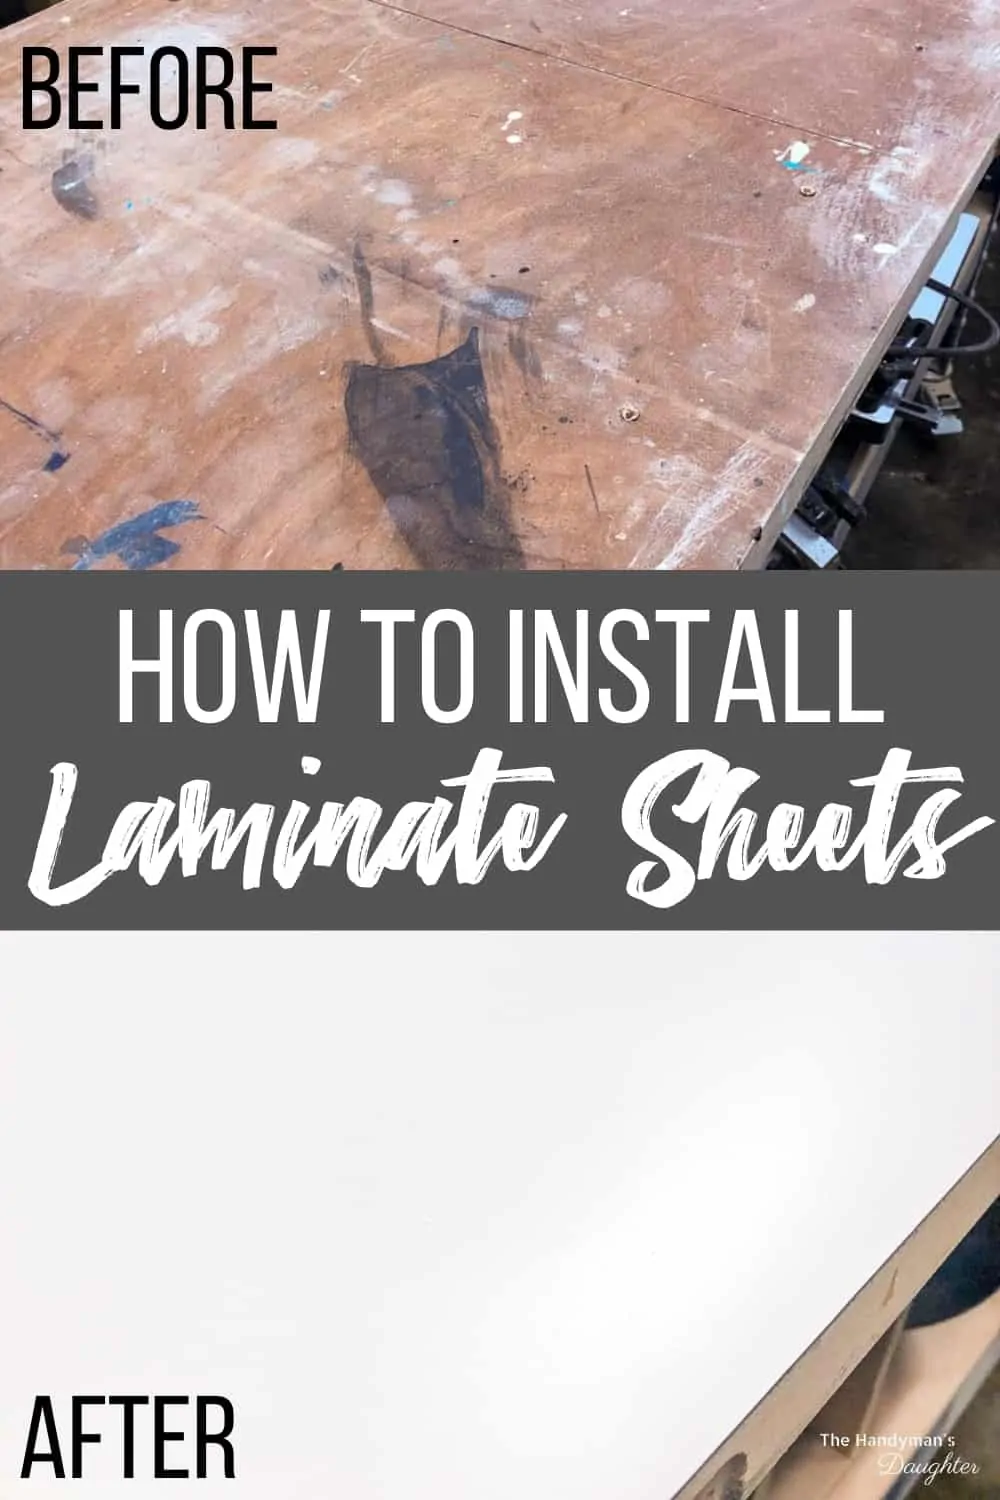 How To Cut And Install Laminate Sheets, Laminate Rolls For Countertops